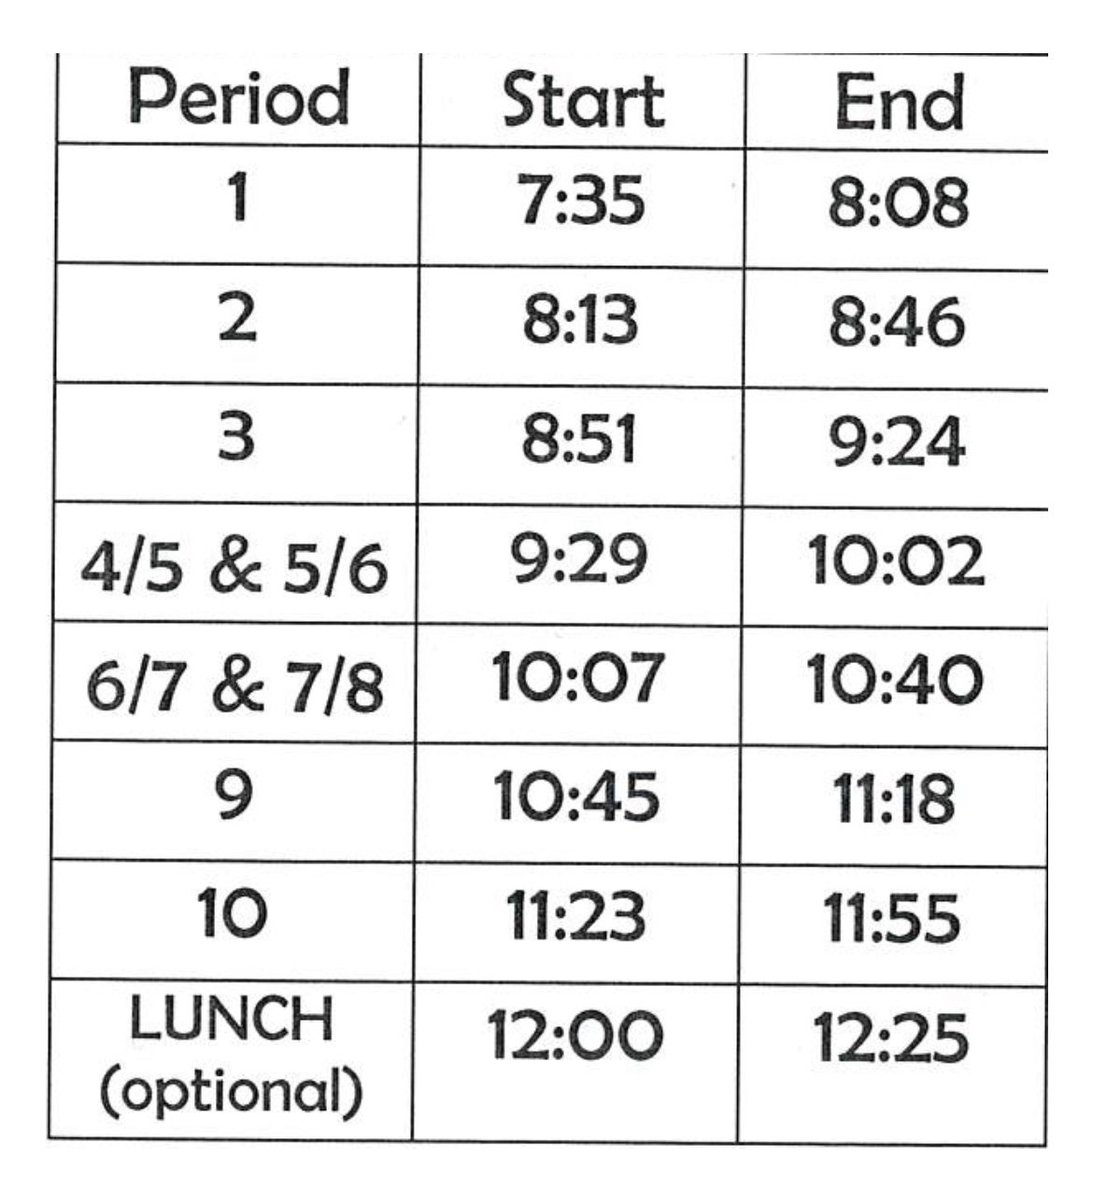 Schedule for Thursday, Mar 9 early dismissal! Travel safe Rams!